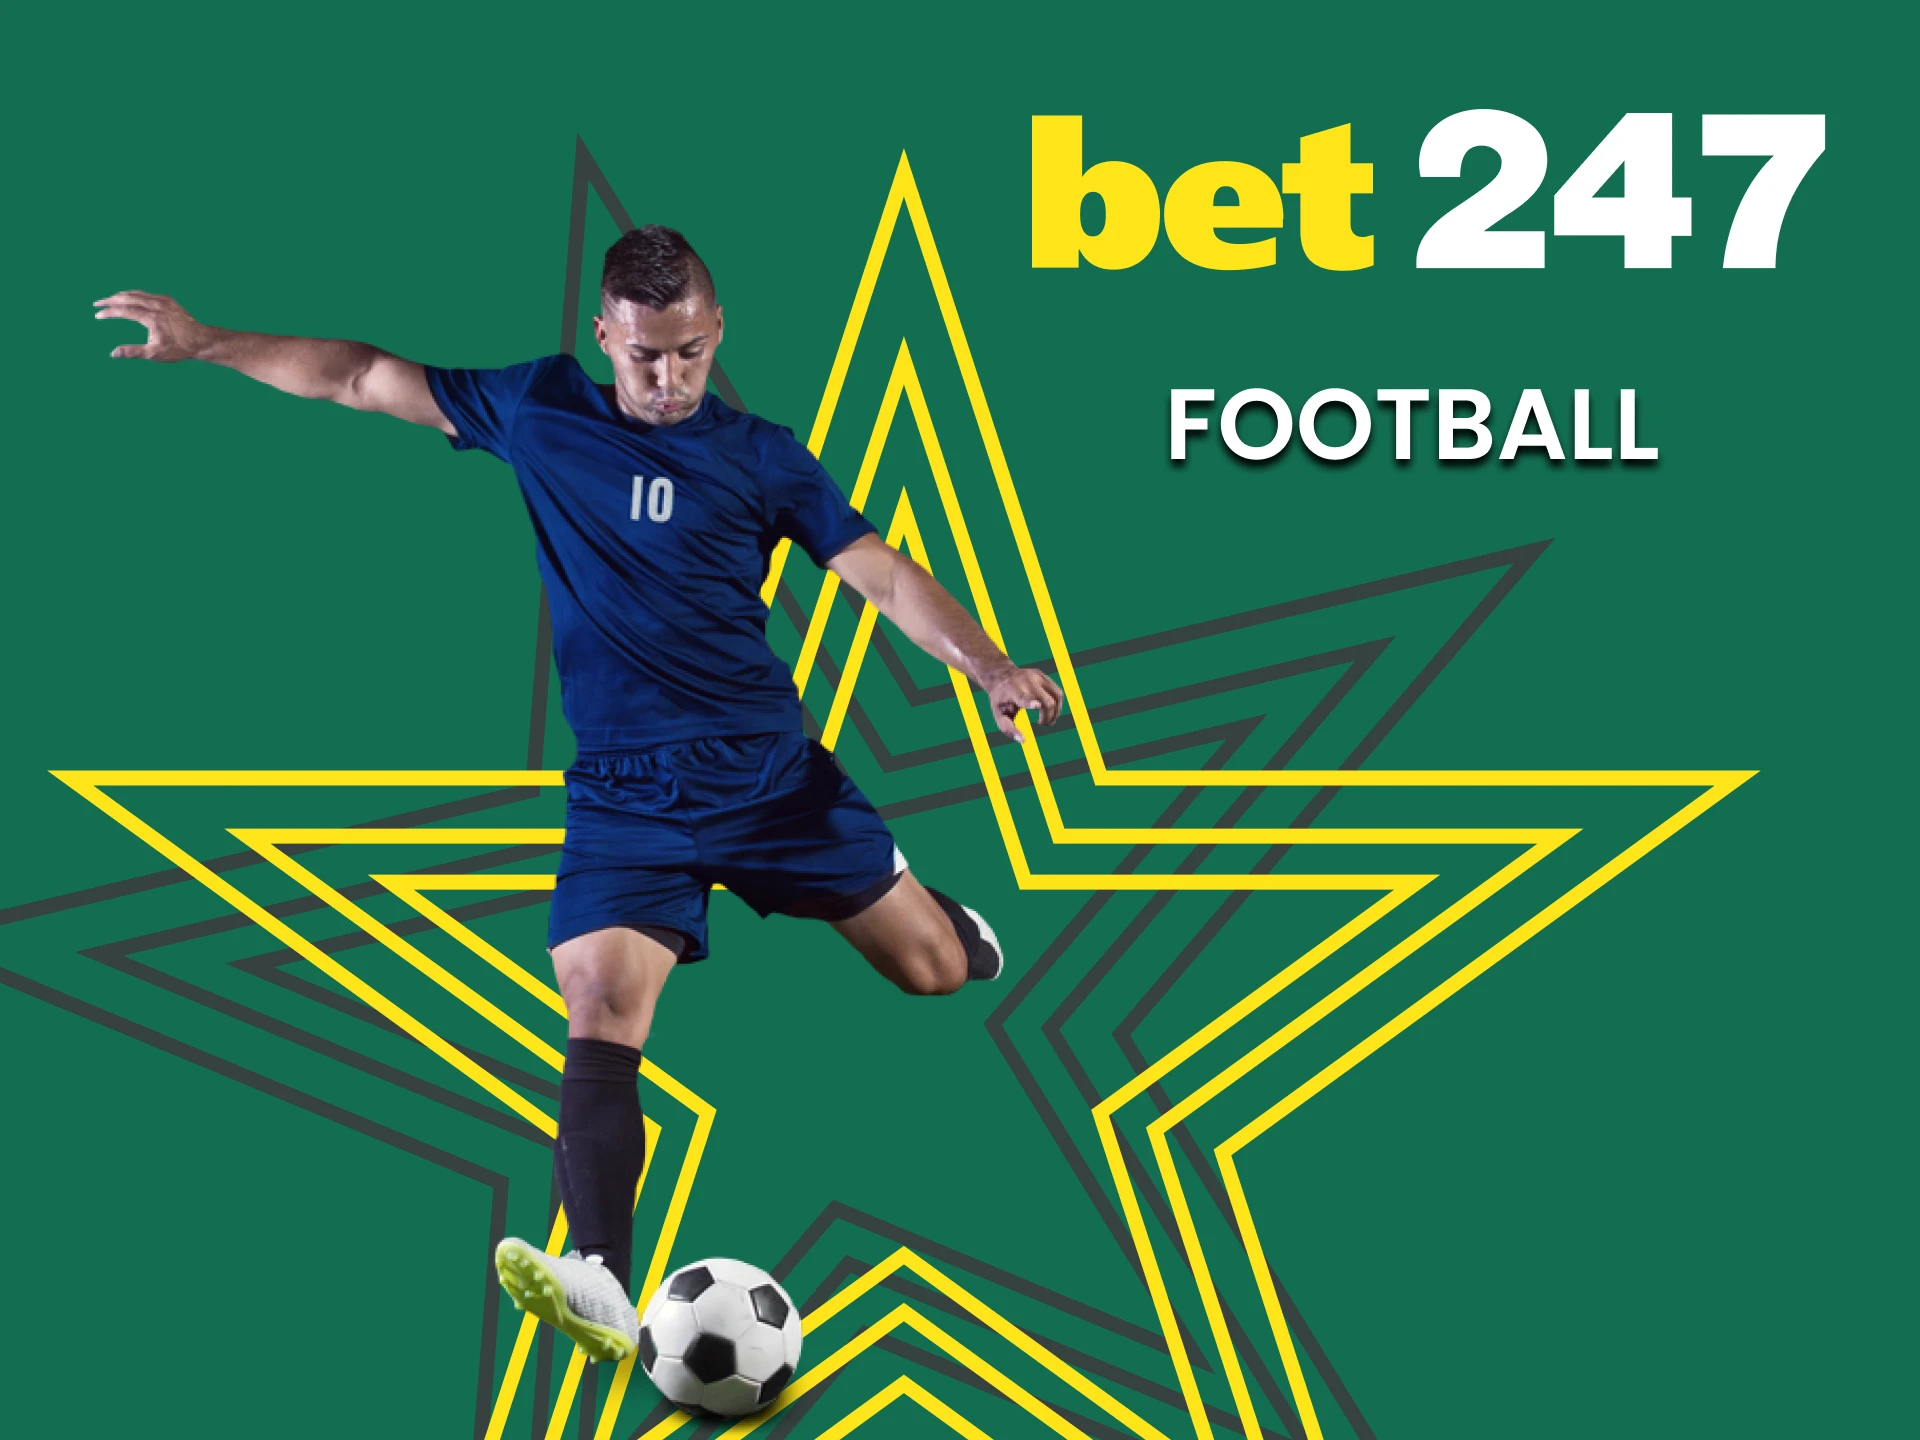 Bet on football with Bet247.